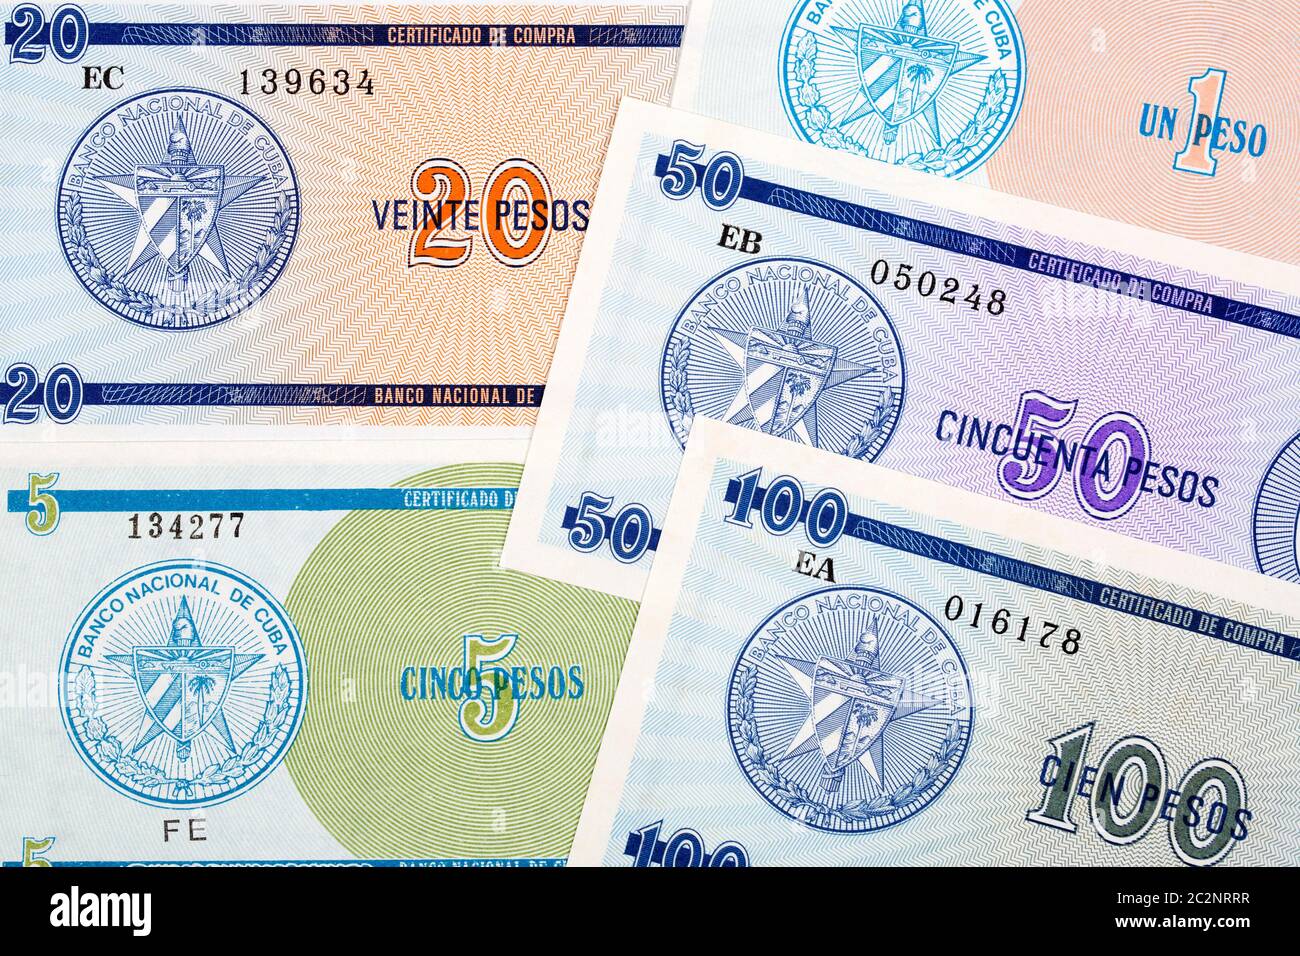 Foreign exchange certificate from Cuba a background Stock Photo